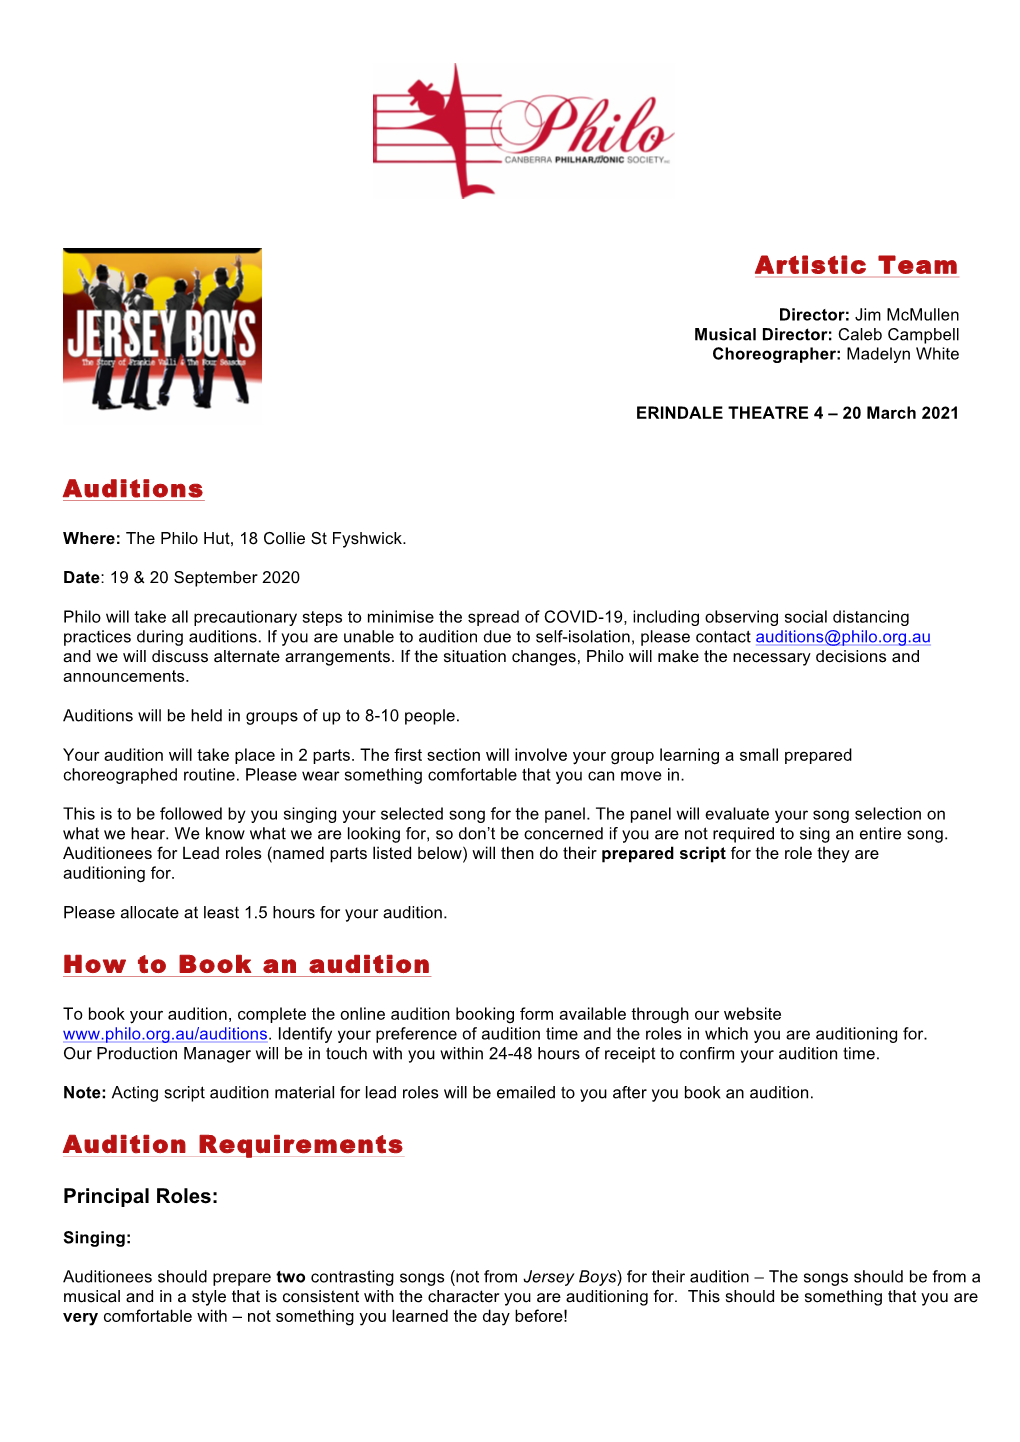 Artistic Team Auditions How to Book an Audition Audition Requirements